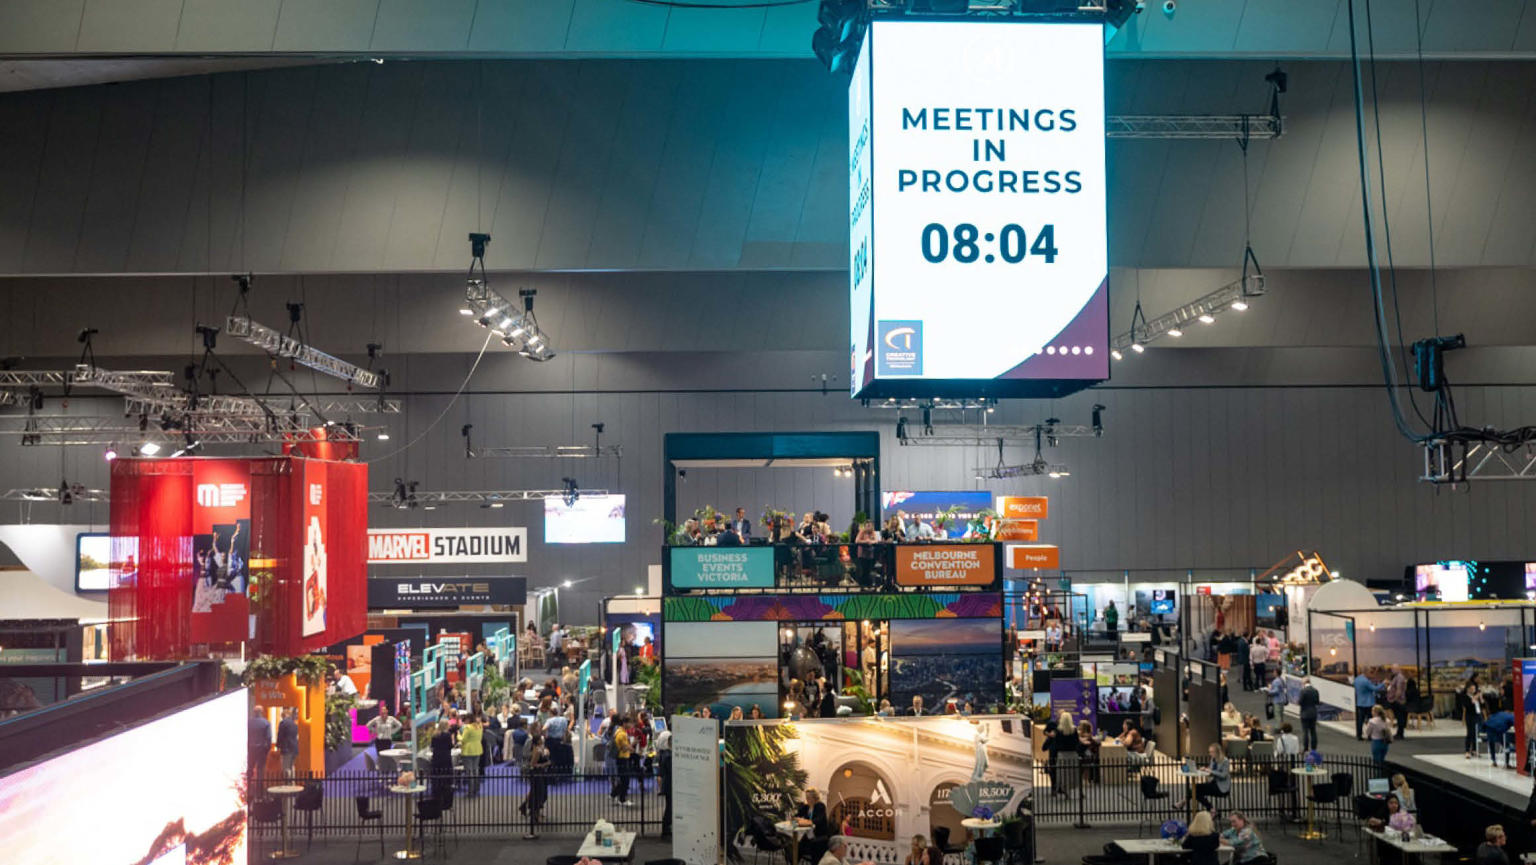 A spacious exhibition area showcasing various stands and bustling with attendees. In the centre hangs a prominent digital sign displaying the message 'Meeting in progress 8:04,' while numerous individuals are seen walking around.